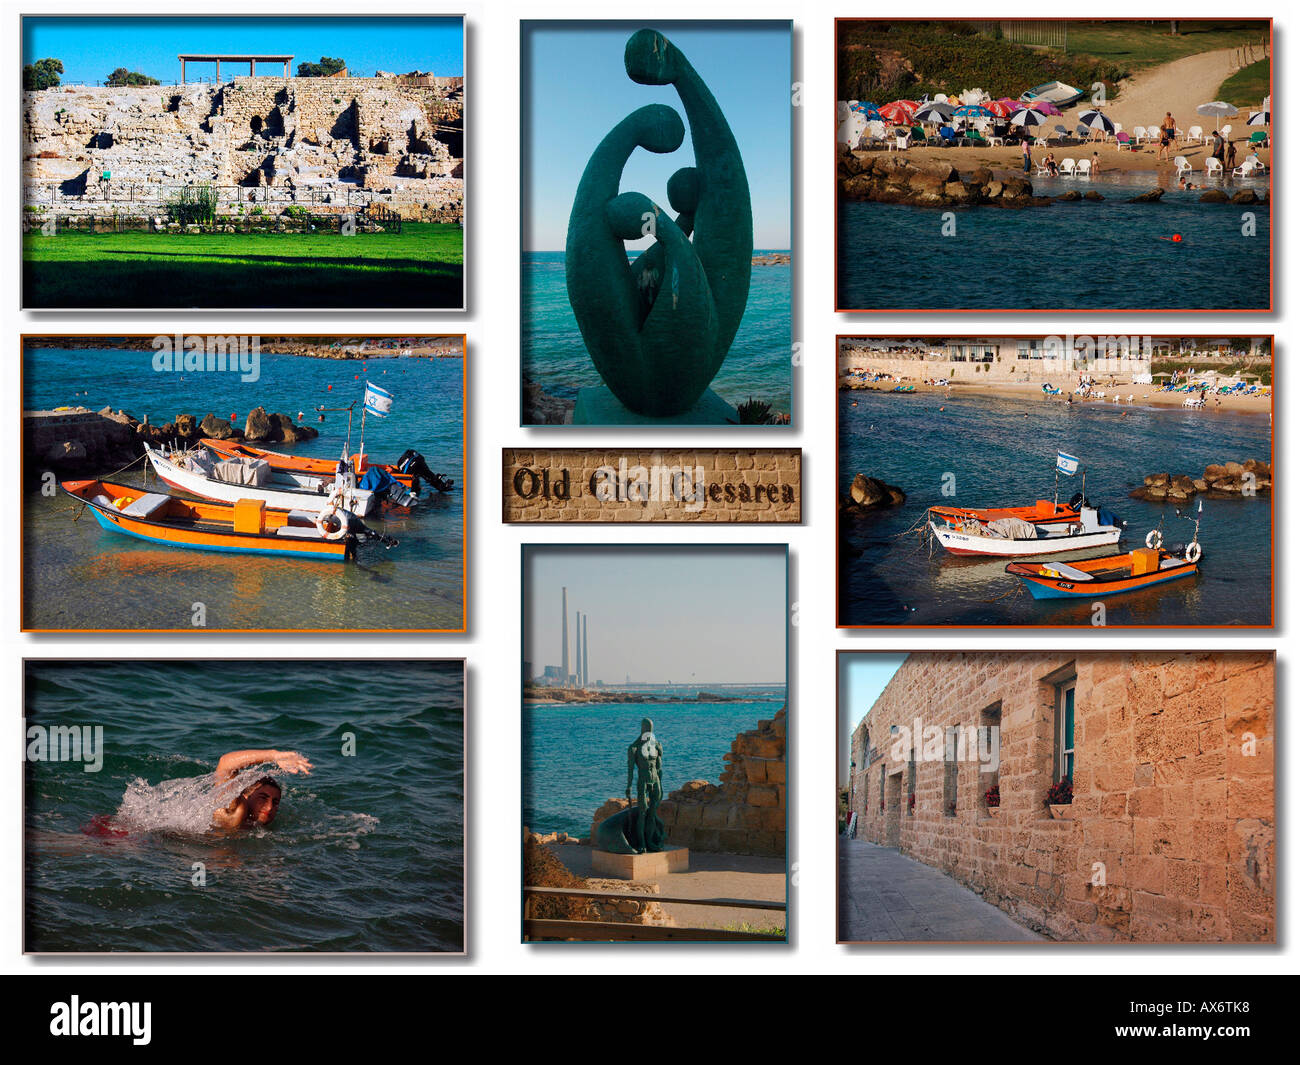 Collage of images from Caesarea Israel Stock Photo